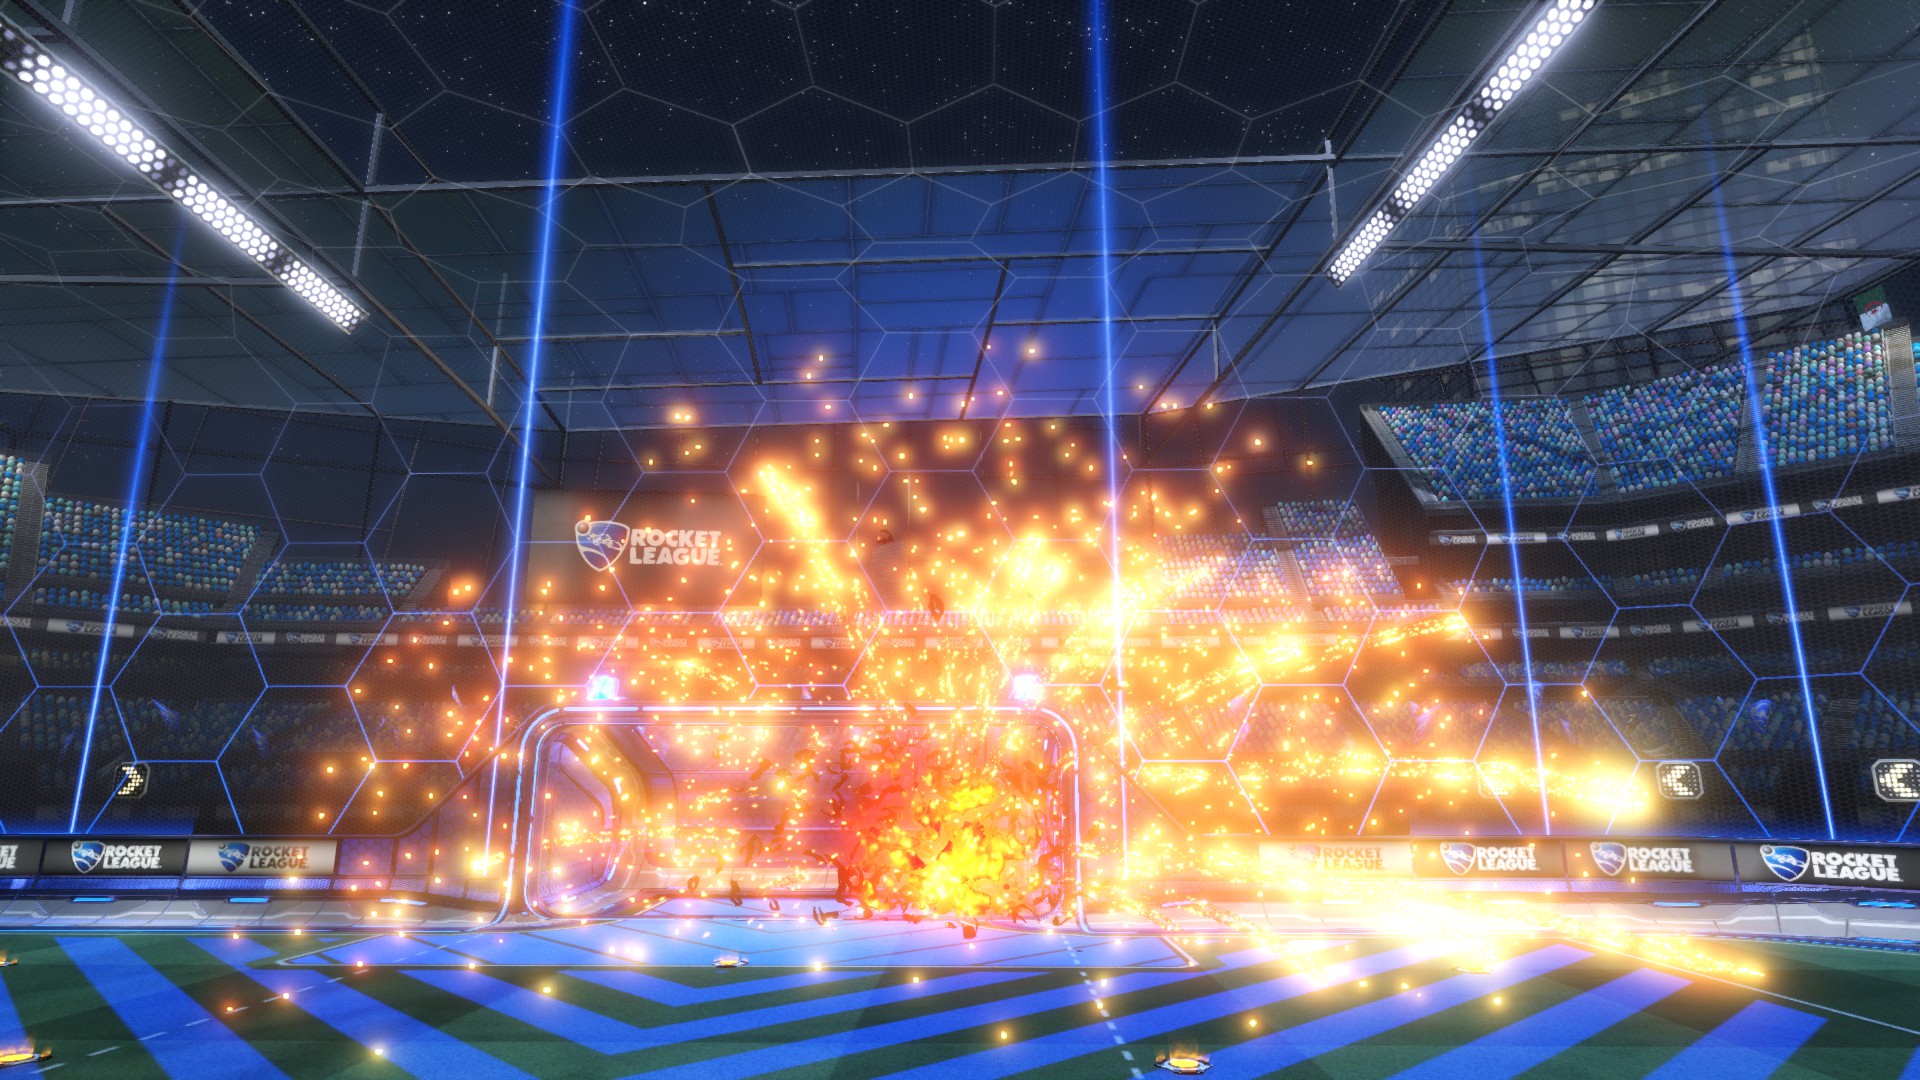 HighParticle GoalExplosion FX(for video editing only!)